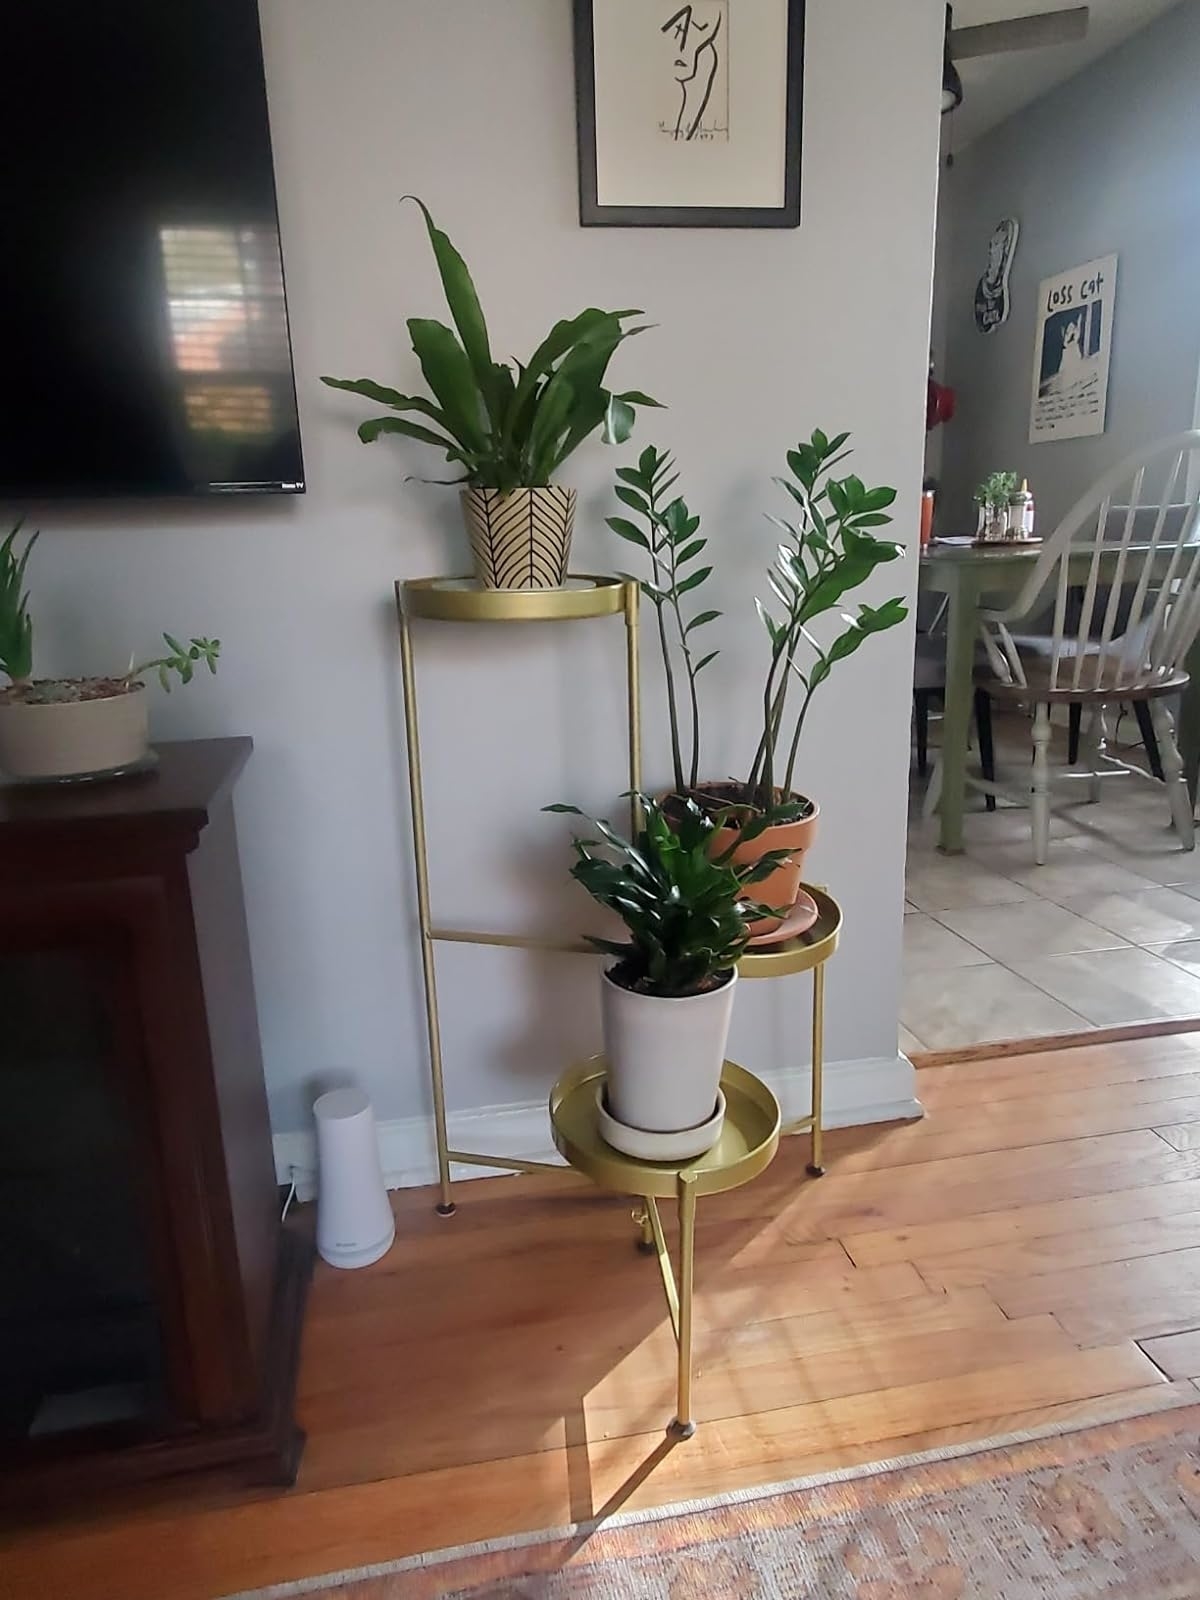 Indoor plant stand with various potted plants in a living room setting